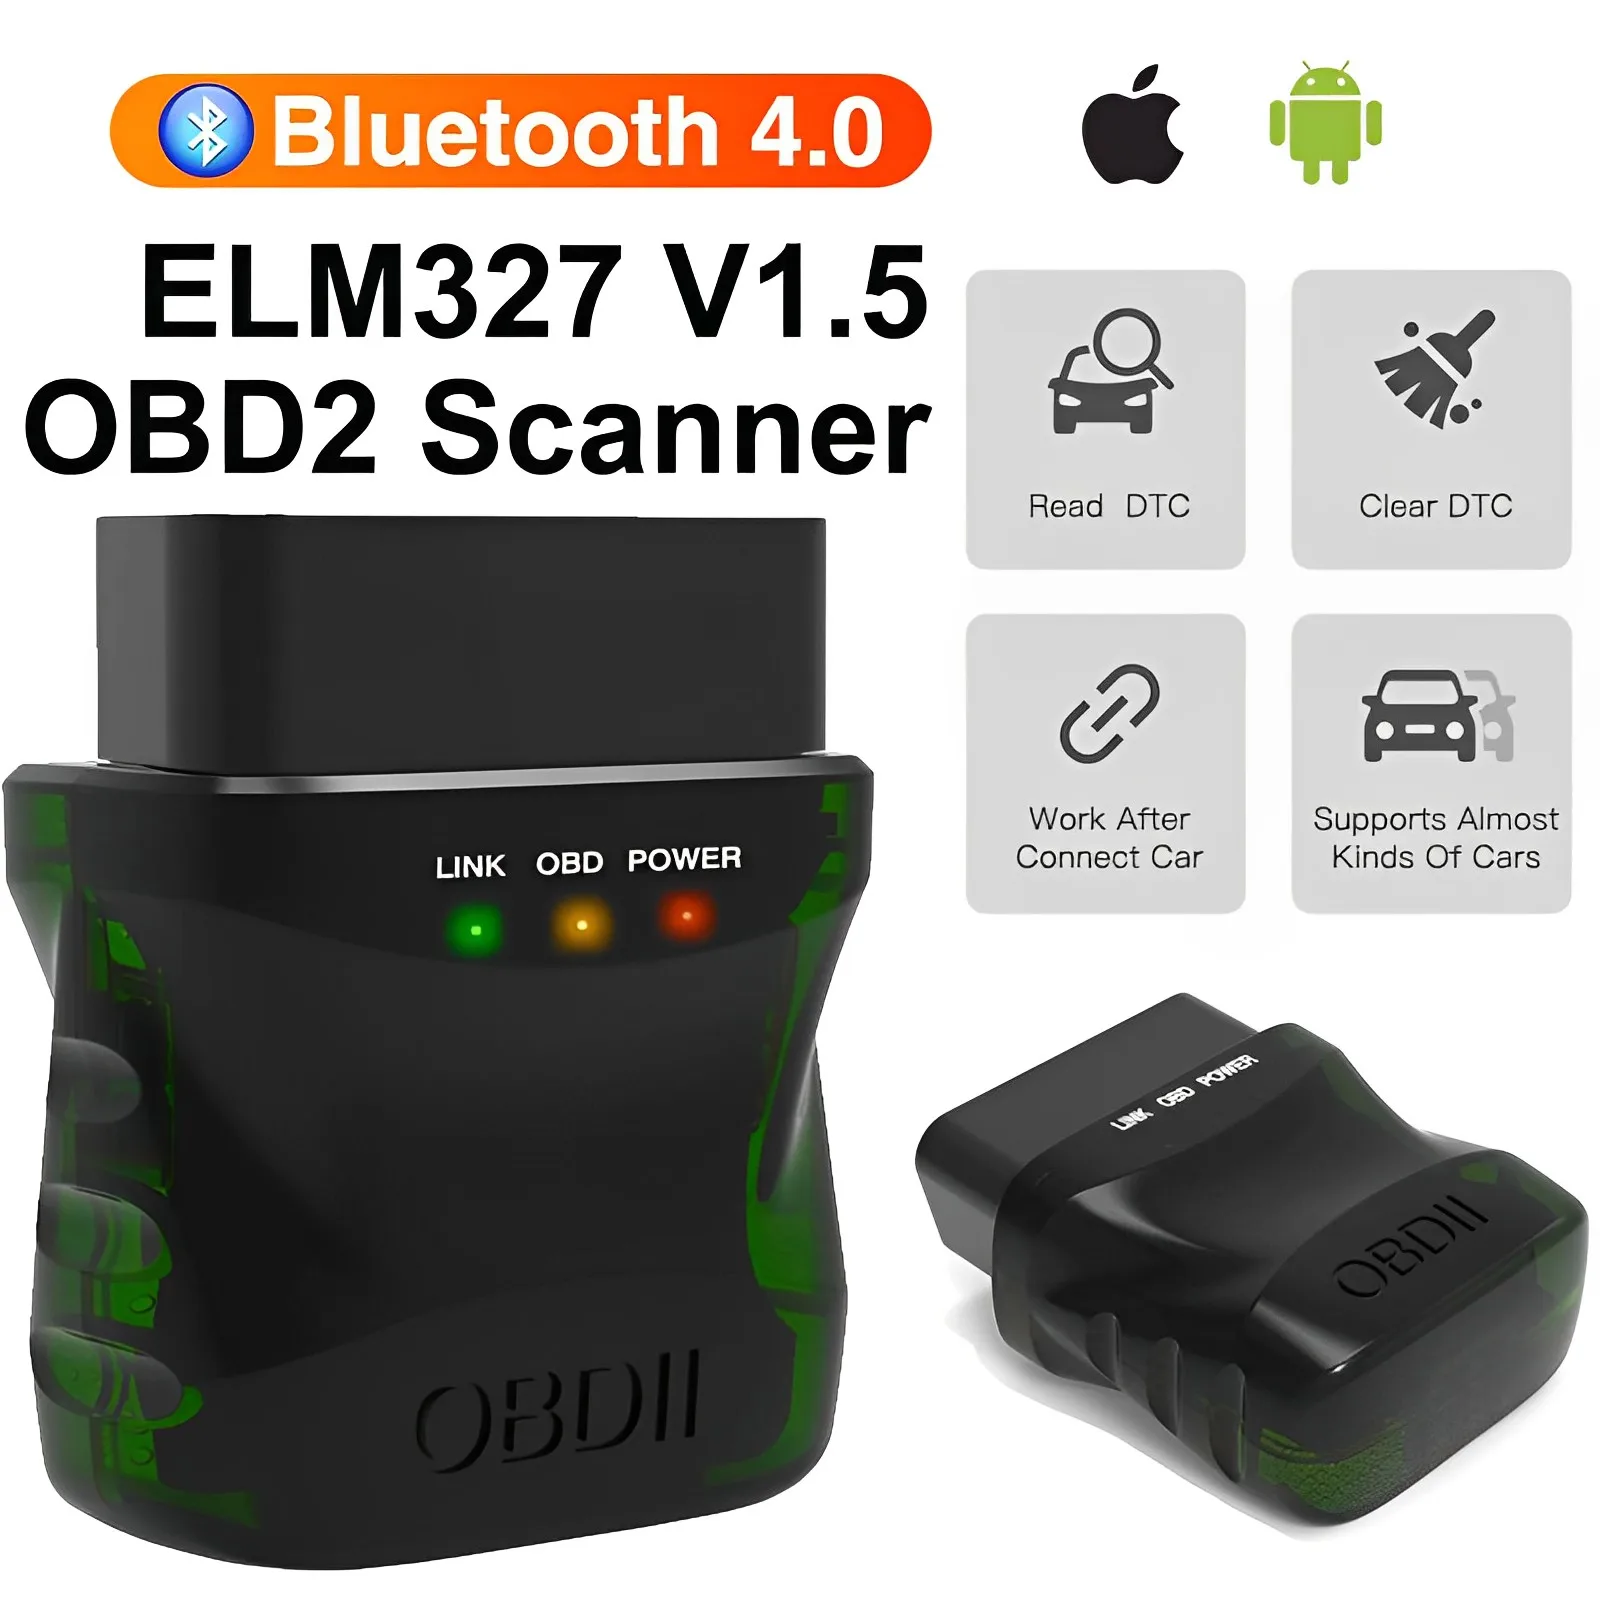 

OBD2 Car Scanner Bluetooth 4.0 ELM327 V1.5 Car Diagnostic Tool for IOS Android 2 In 1 Code Reader Clear Error Check Engine Light